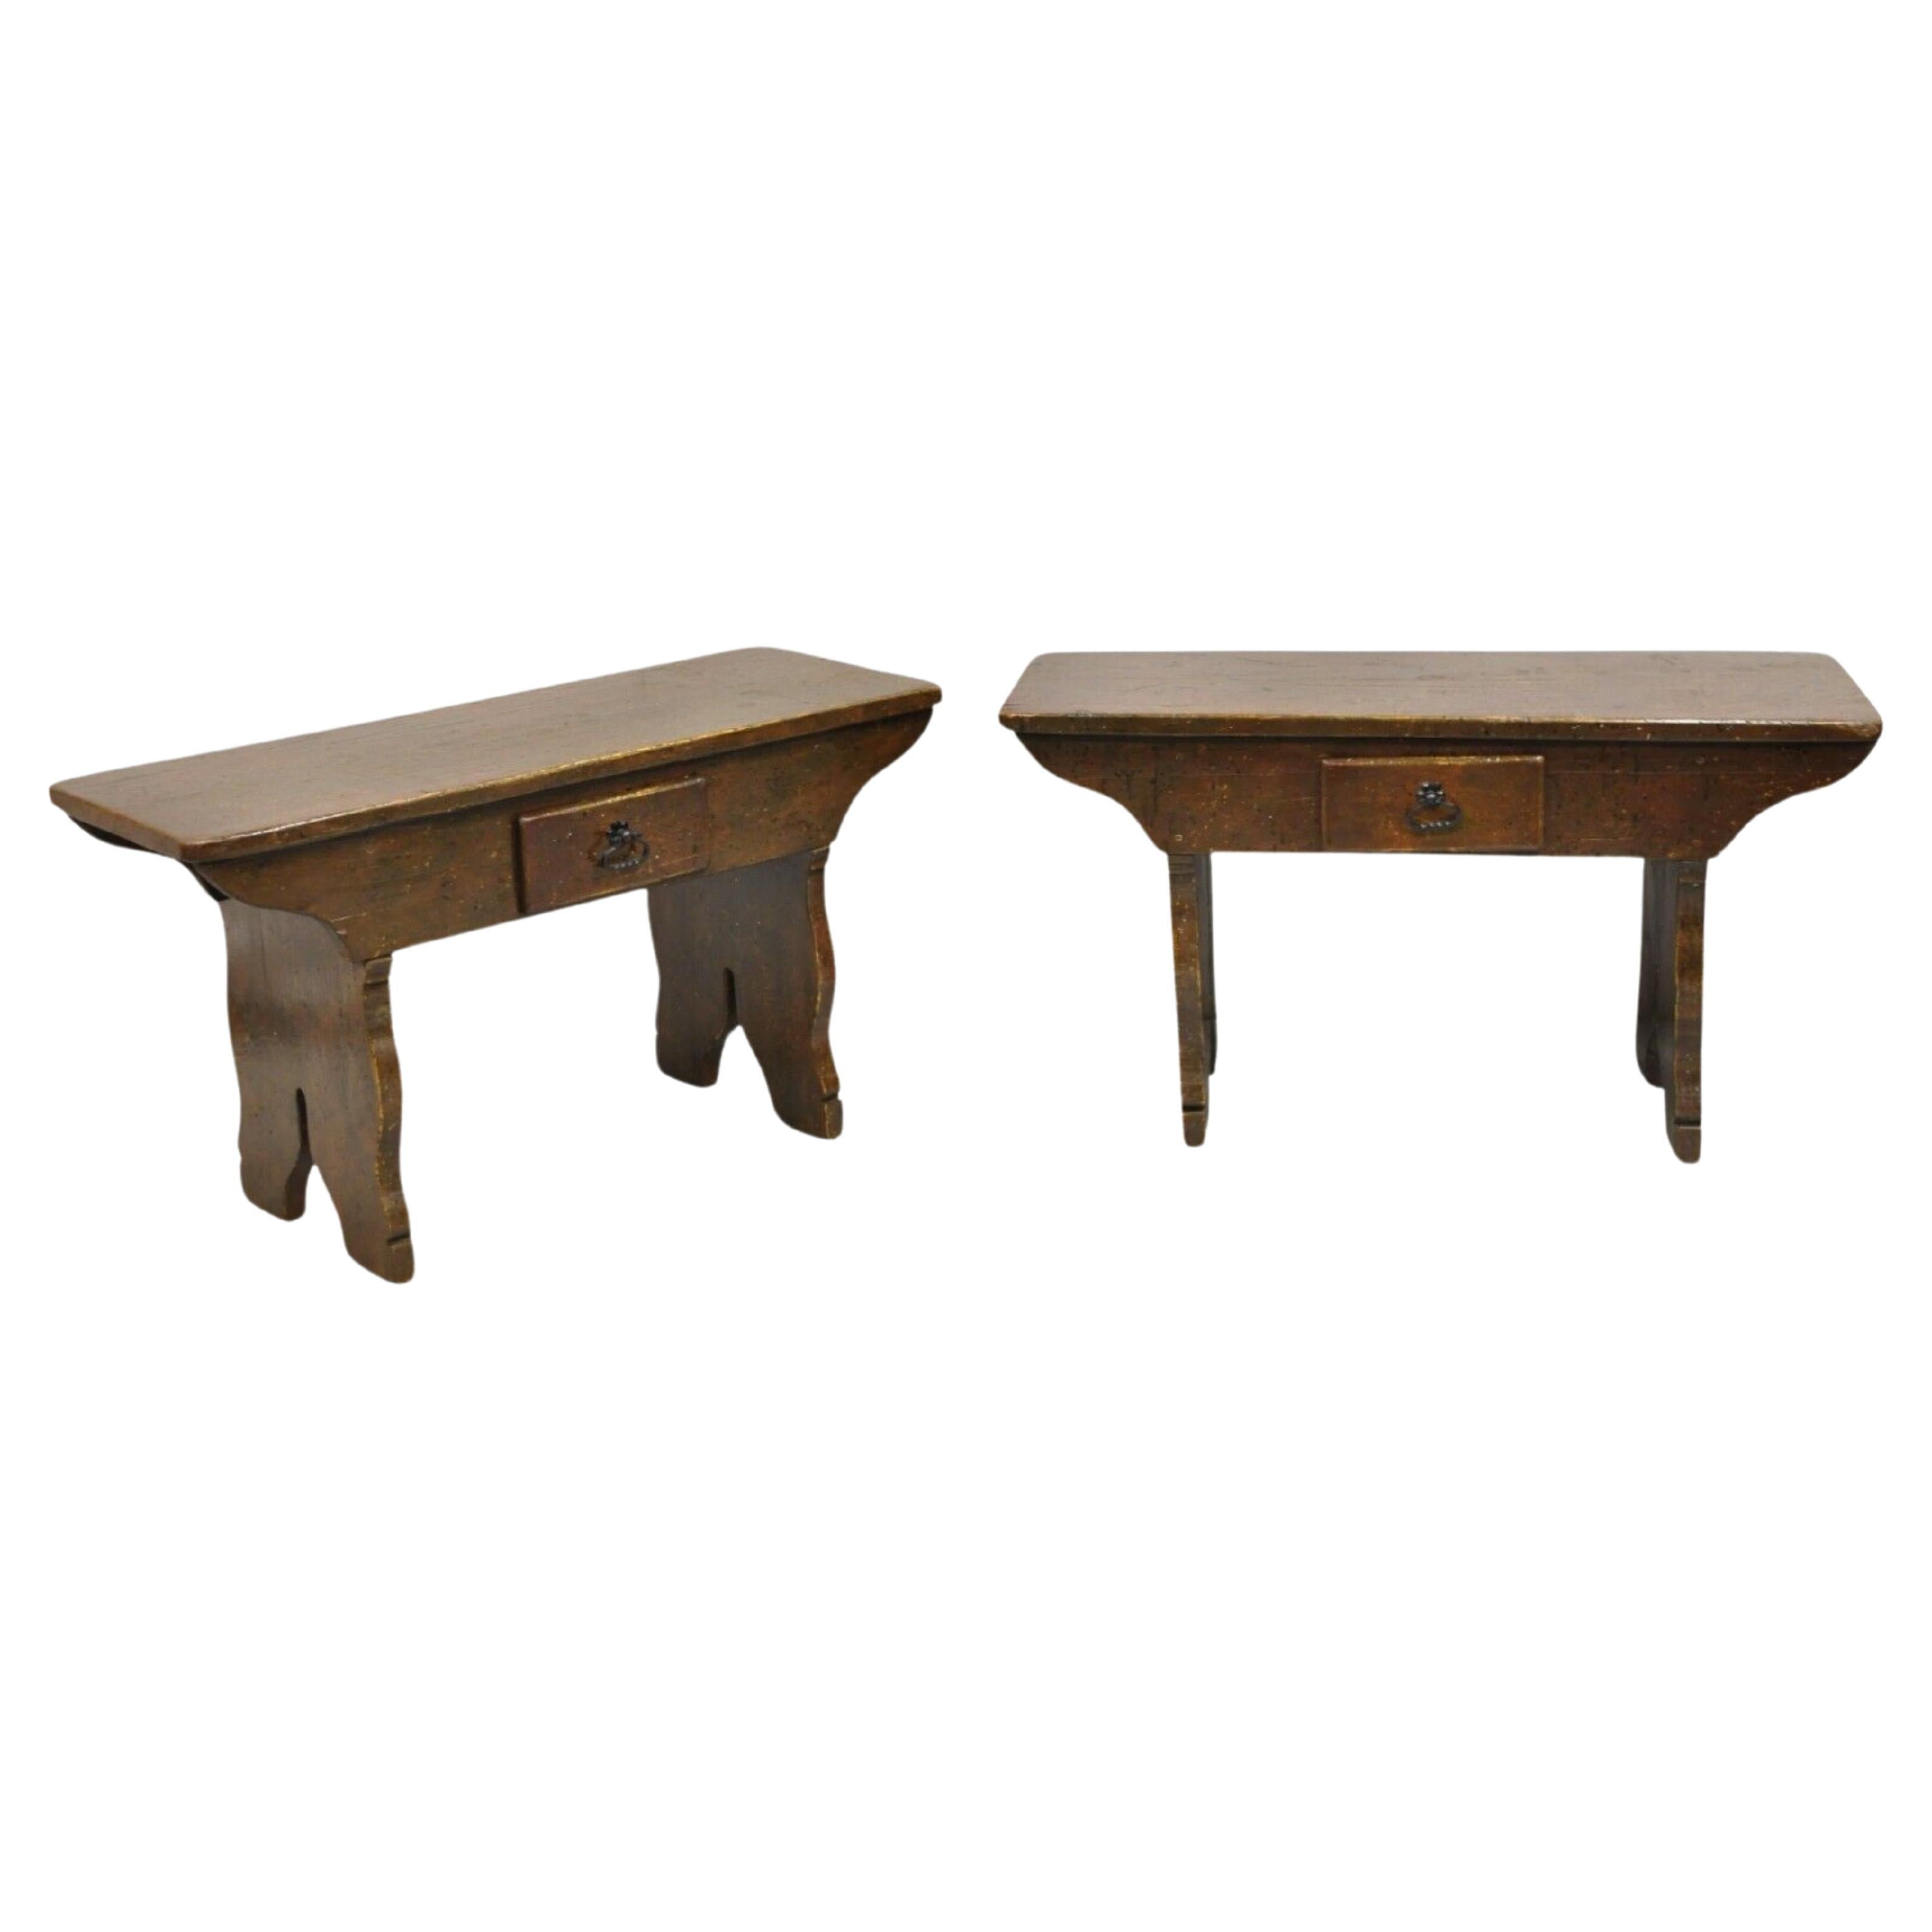 Antique French Country Farmhouse Pine Wood Low Side Table Bench w/ Drawer - Pair